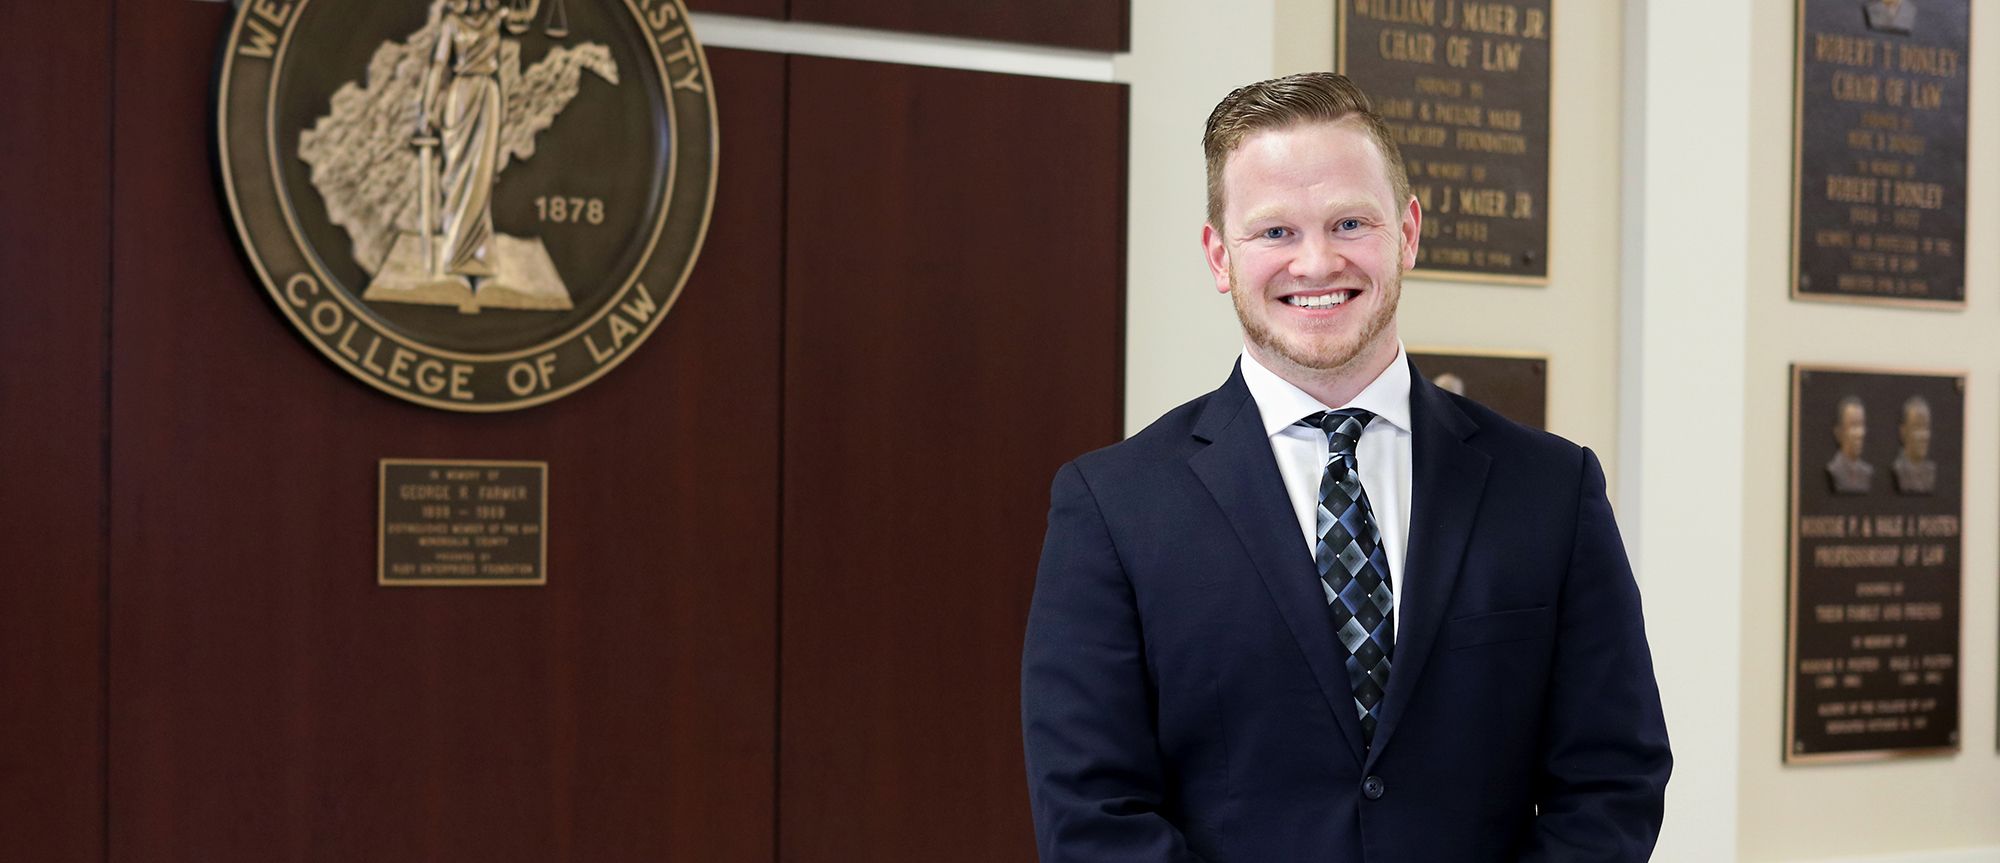 WVU Law student Mitch Moore '19